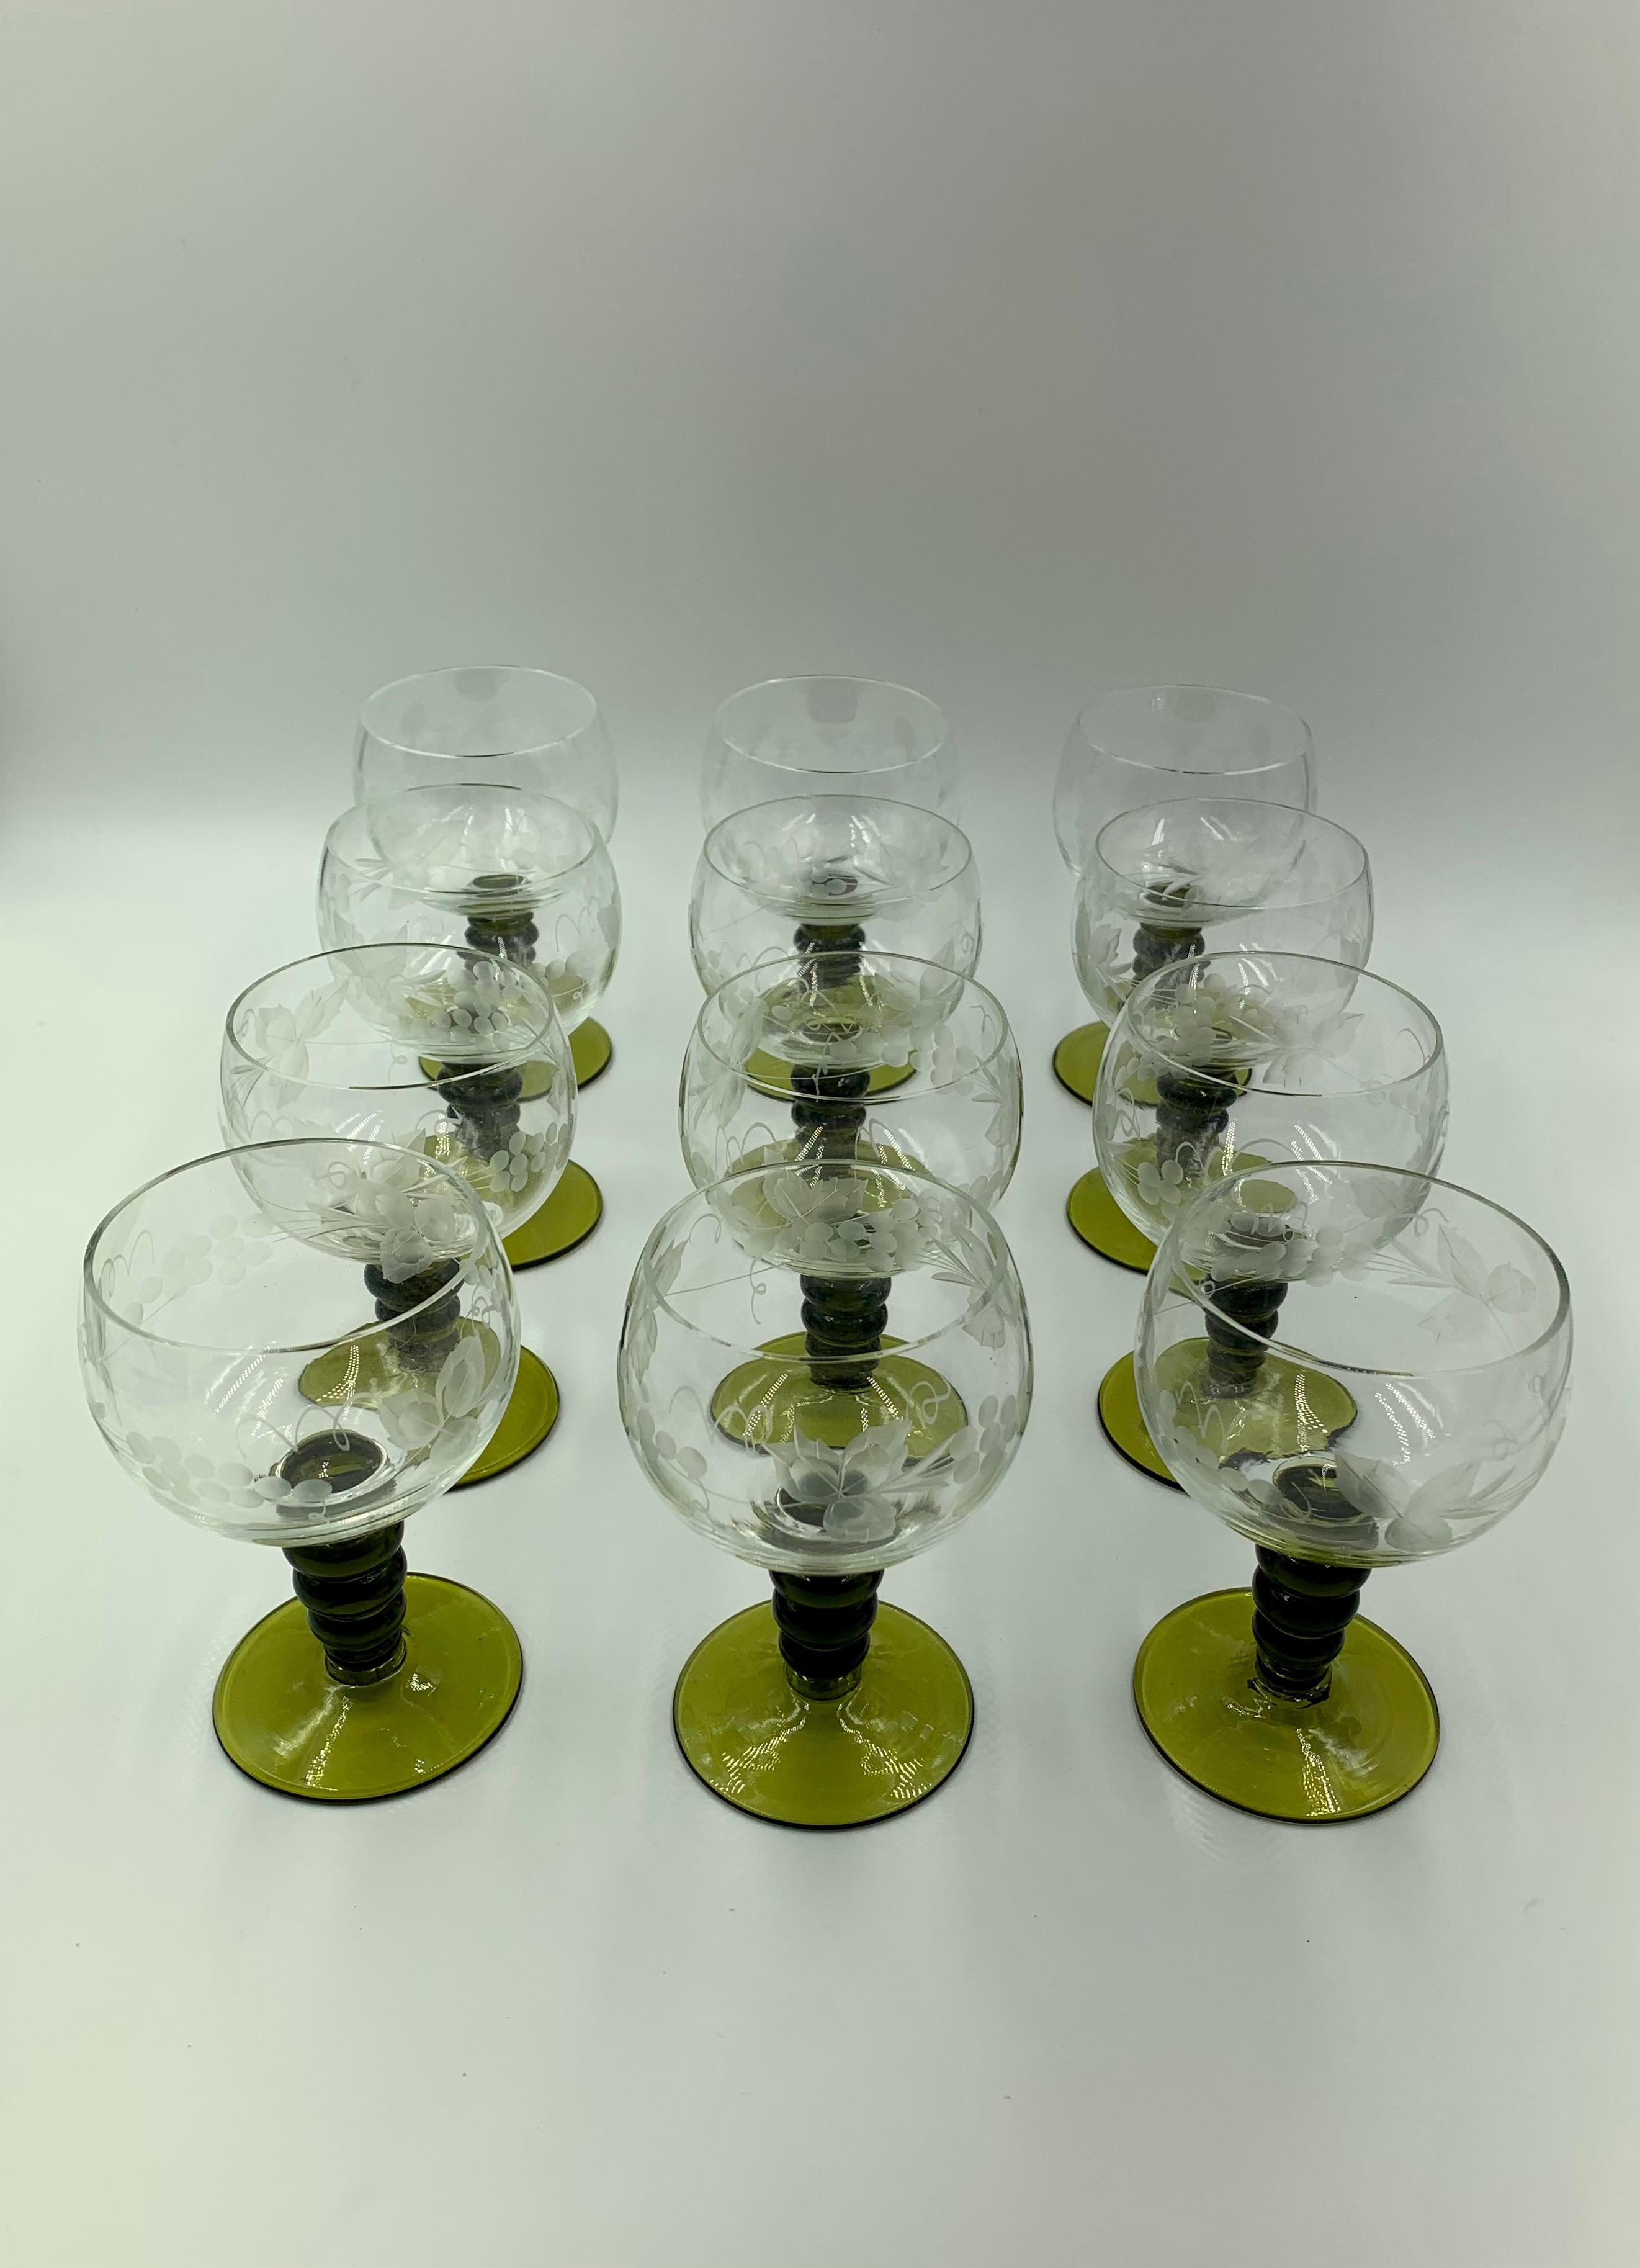 European Set of 12 Bohemian Rhine Wine Glasses, Engraved Grapevine motif with Green Stem For Sale